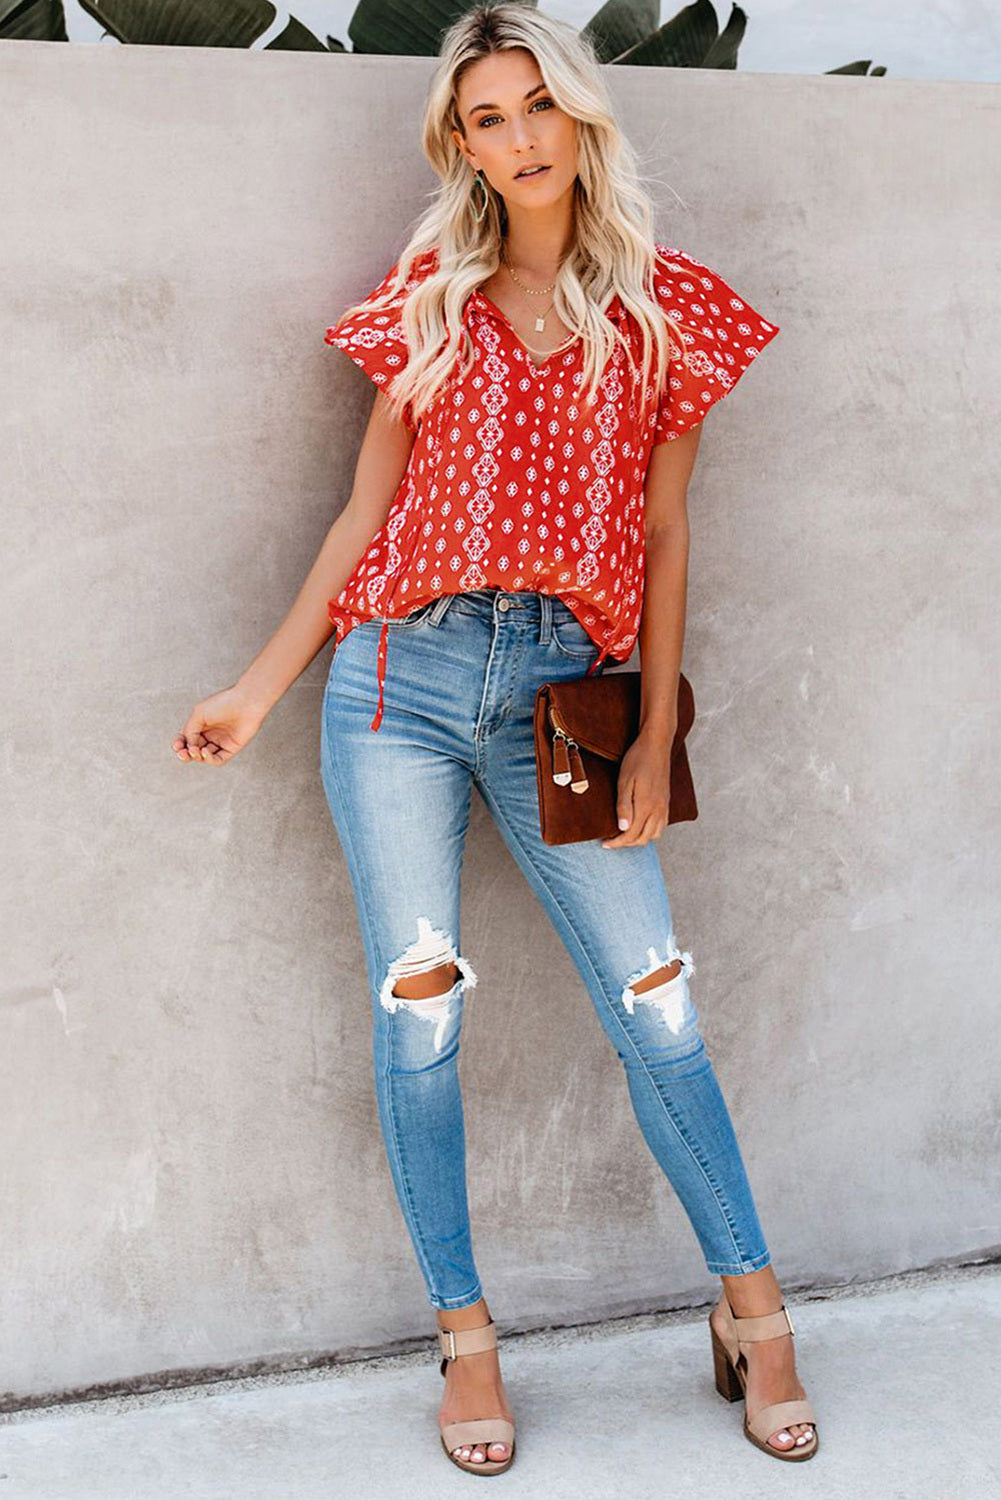 Red V Neck Short Sleeve Print Floral Blouses Shirts LC2514201-3